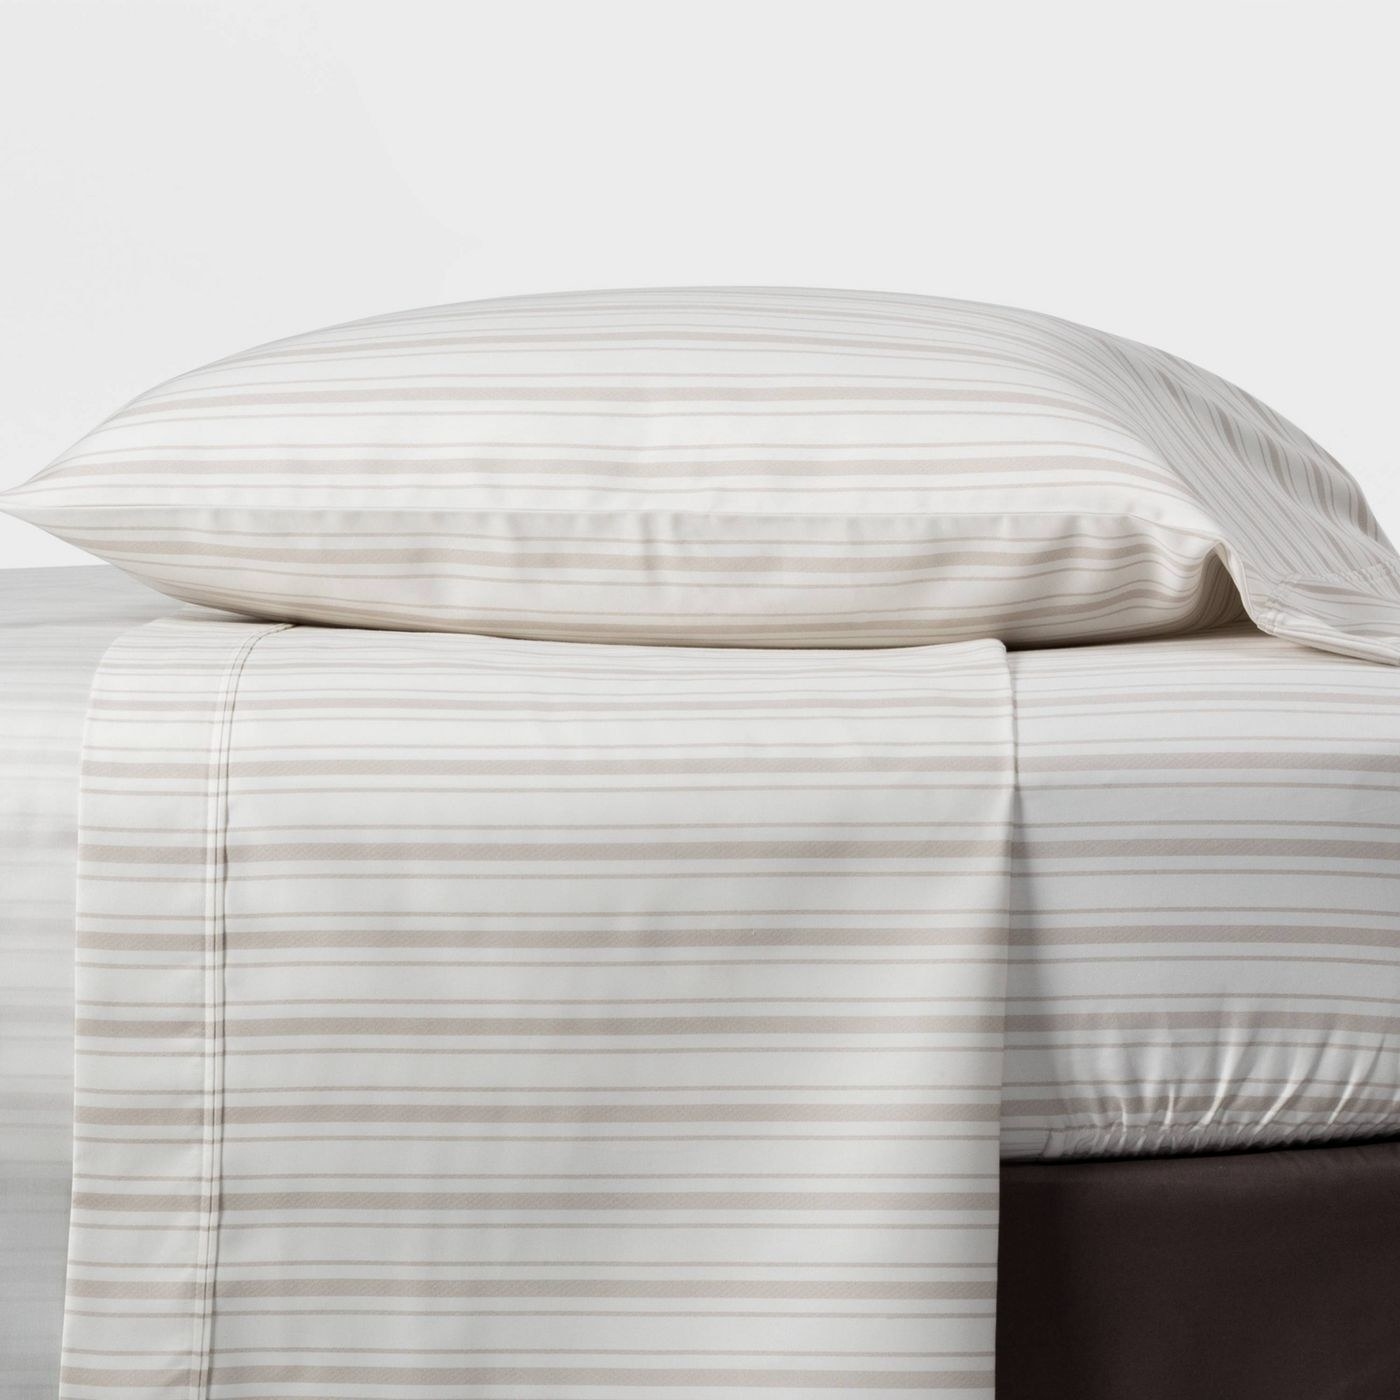 A bed sheathed in a white and pink striped sheet with a pillow on top in a matching case